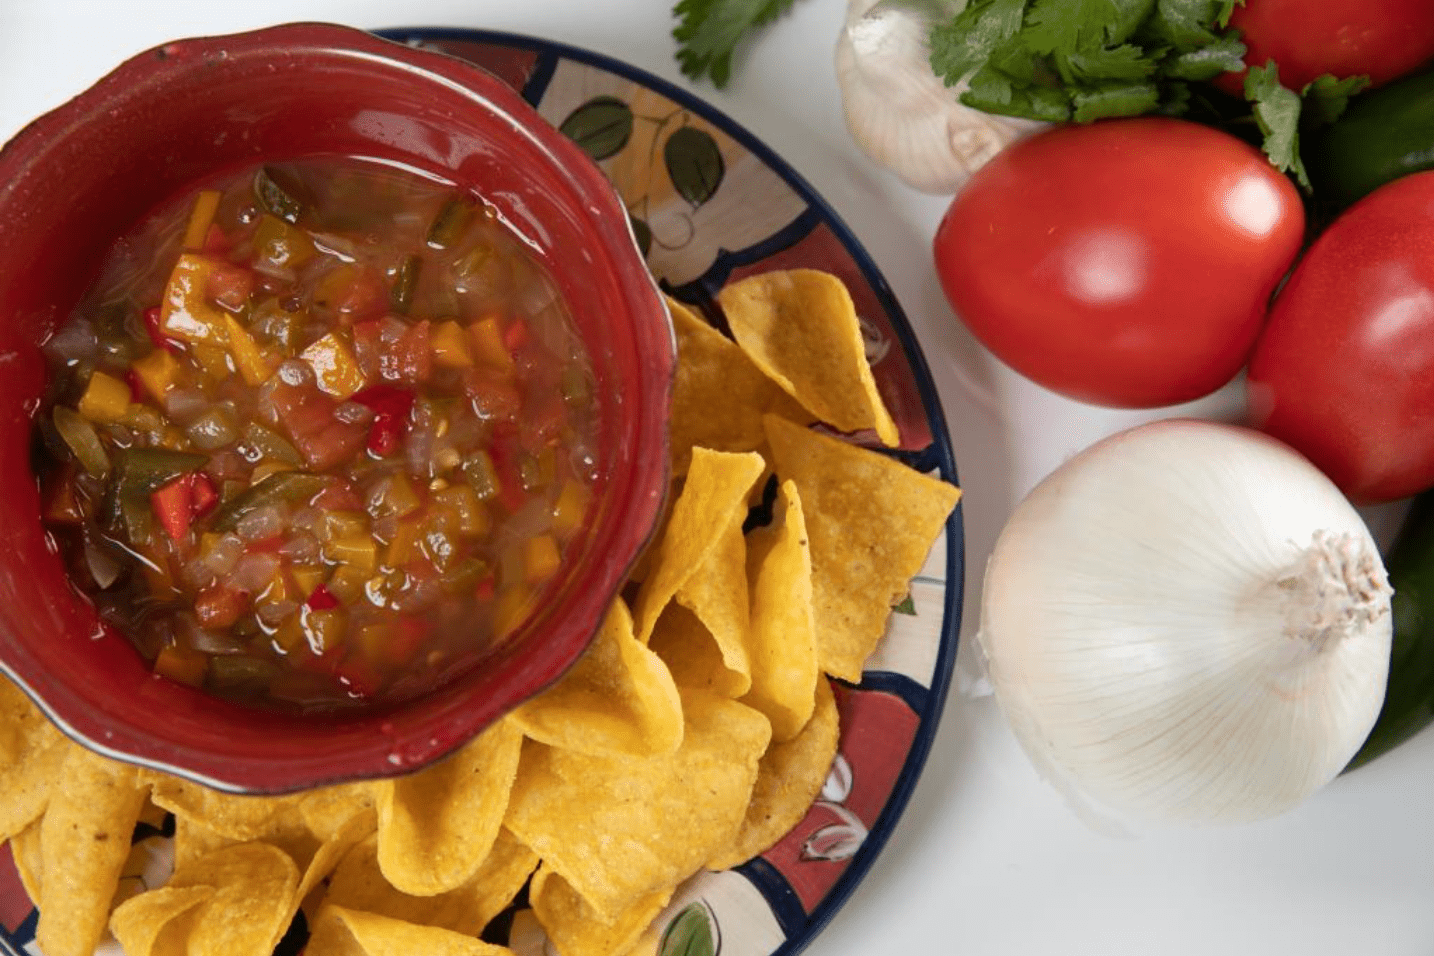 festive pottery plate with a red bowl with tomato salsa on the plate, surrounded by corn tortilla chips. White tablecloth background, next to the plate, has a white onion, roma tomatoes, cilantro, and a head of garlic partially visible from under the cilantro